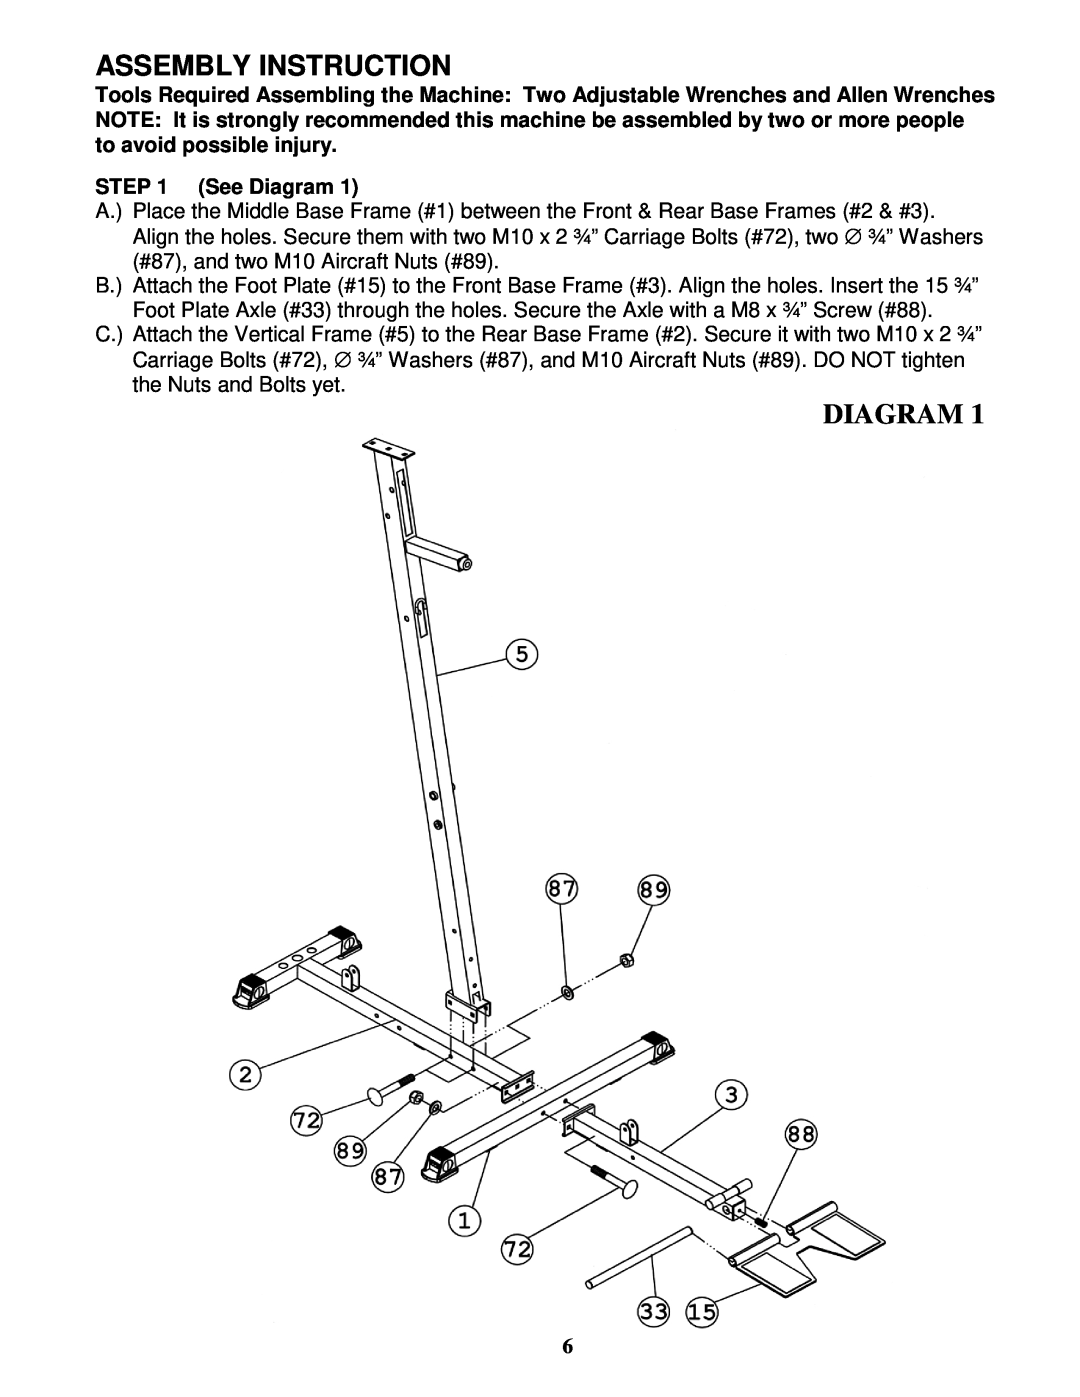 Impex PHE 2000 manual Assembly Instruction, Diagram 